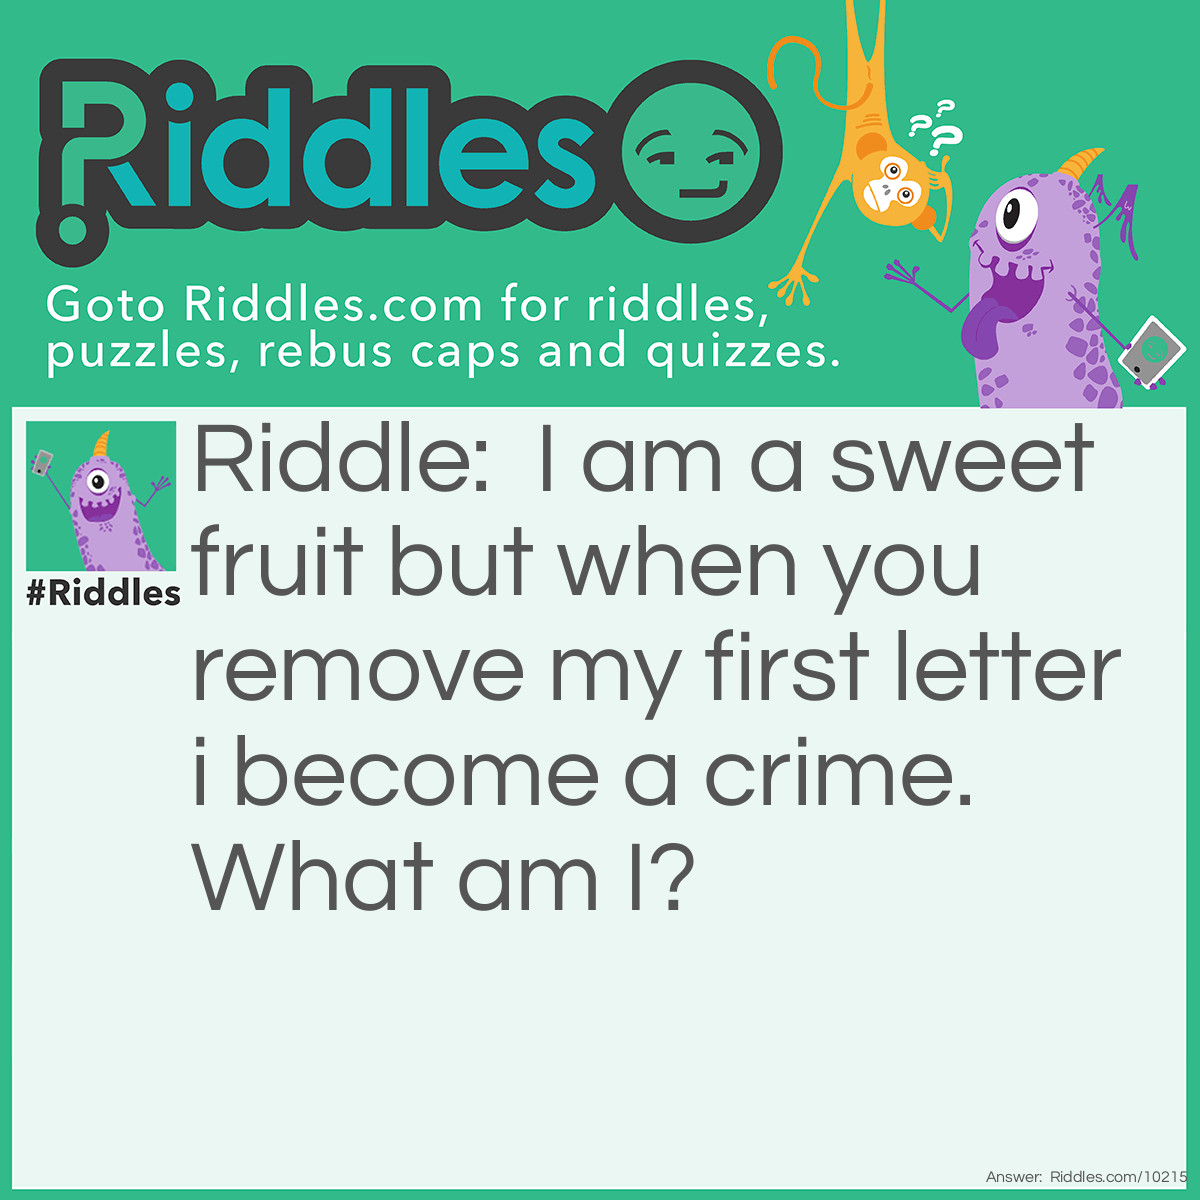 Riddle: I am a sweet fruit but when you remove my first letter i become a crime. What am I? Answer: Grape.